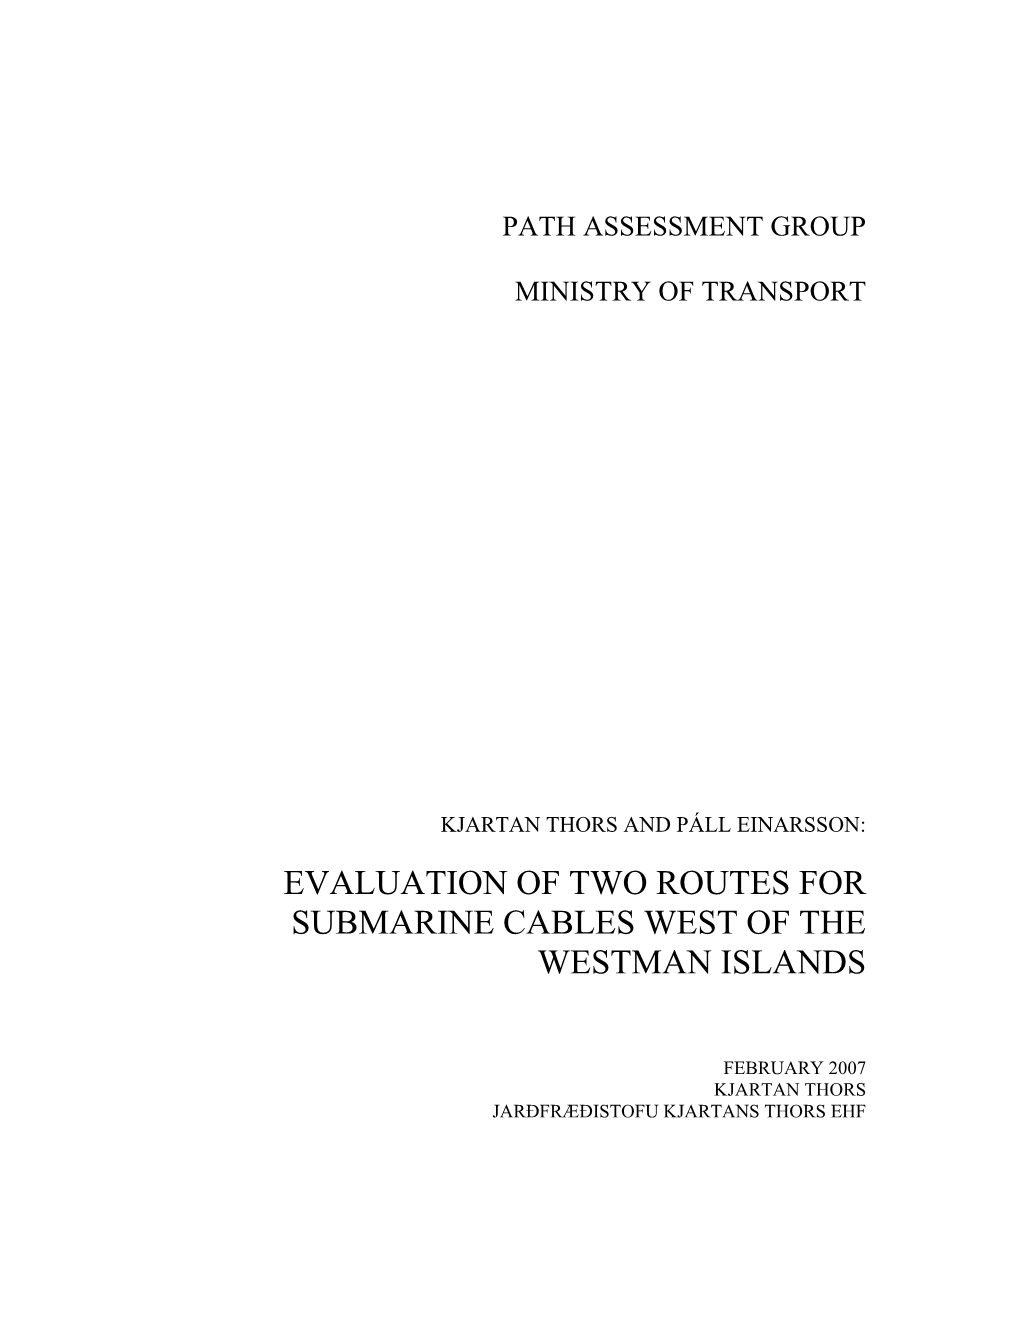 Evaluation of Two Routes for Submarine Cables West of the Westman Islands